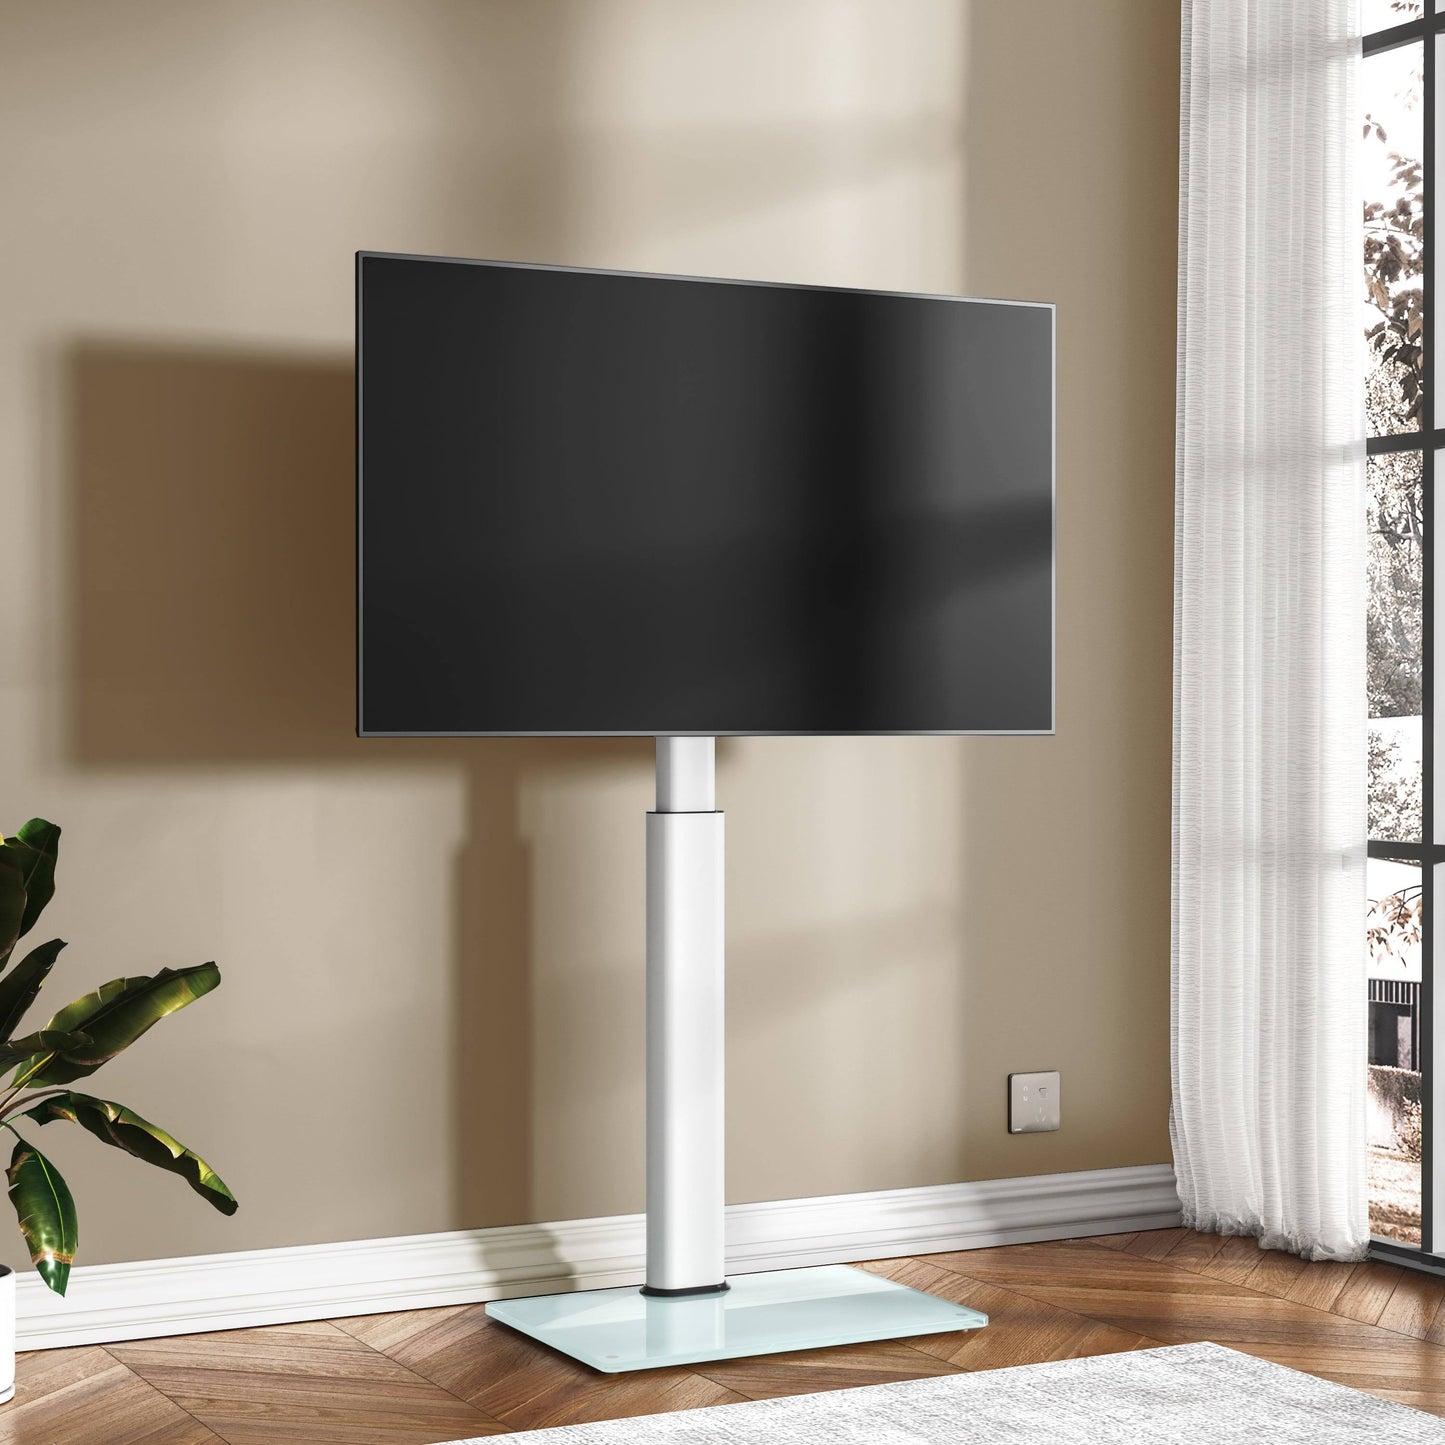 Stand With Swivel Mount For Tvs Up To 60